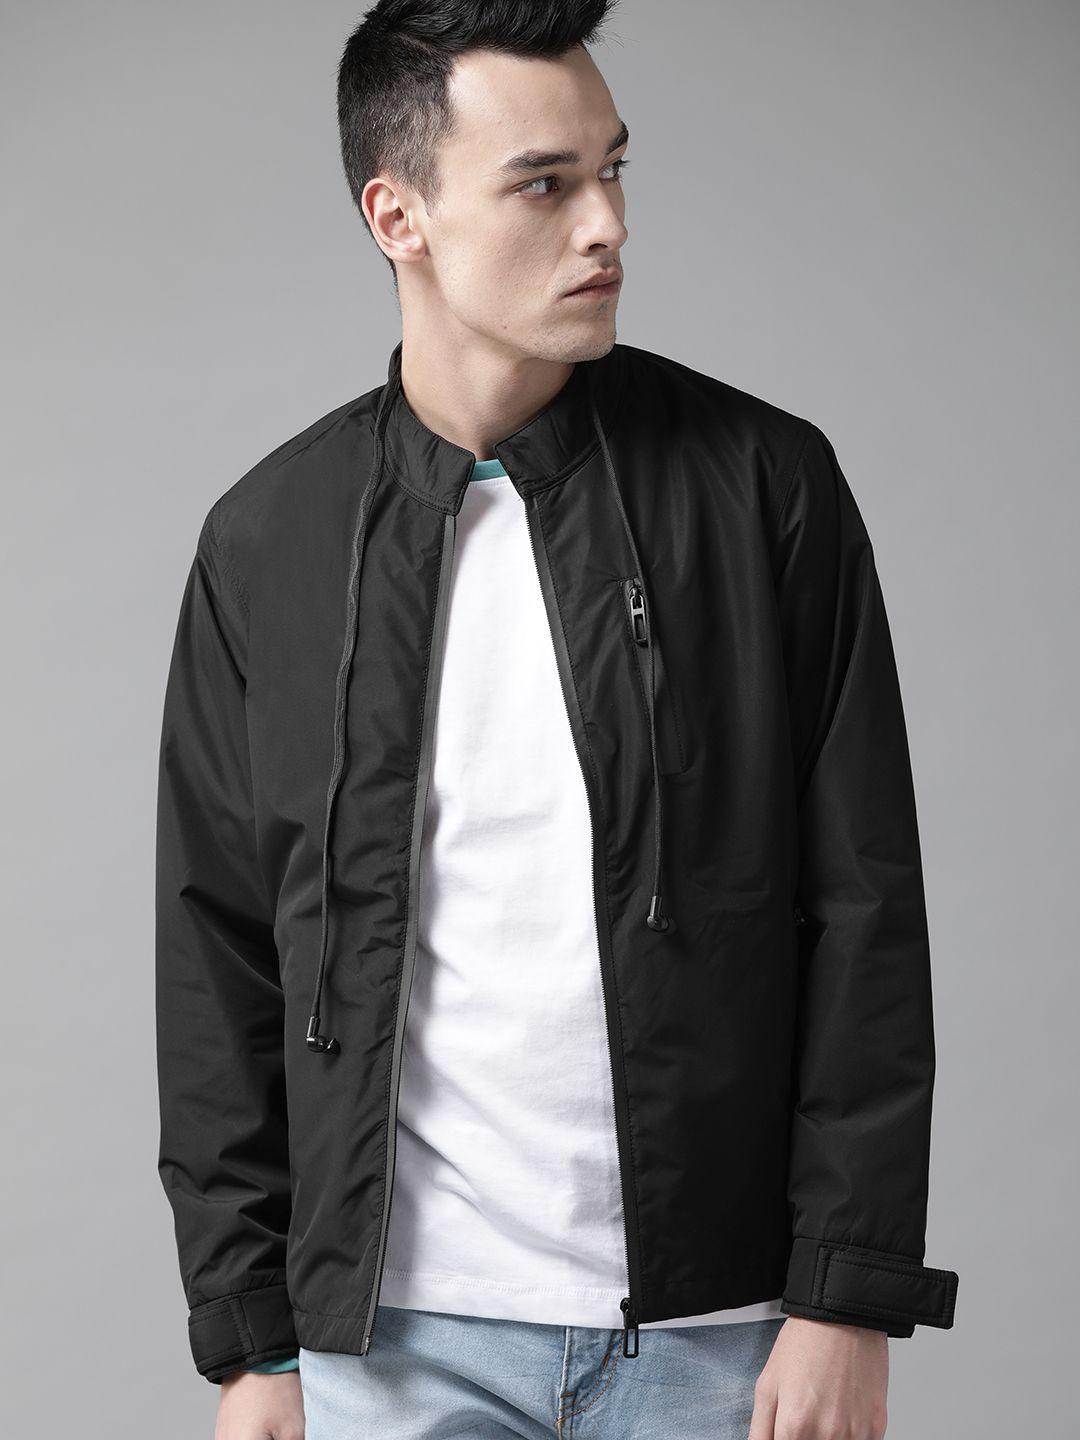 the roadster lifestyle co men black solid tailored jacket with attached earphones